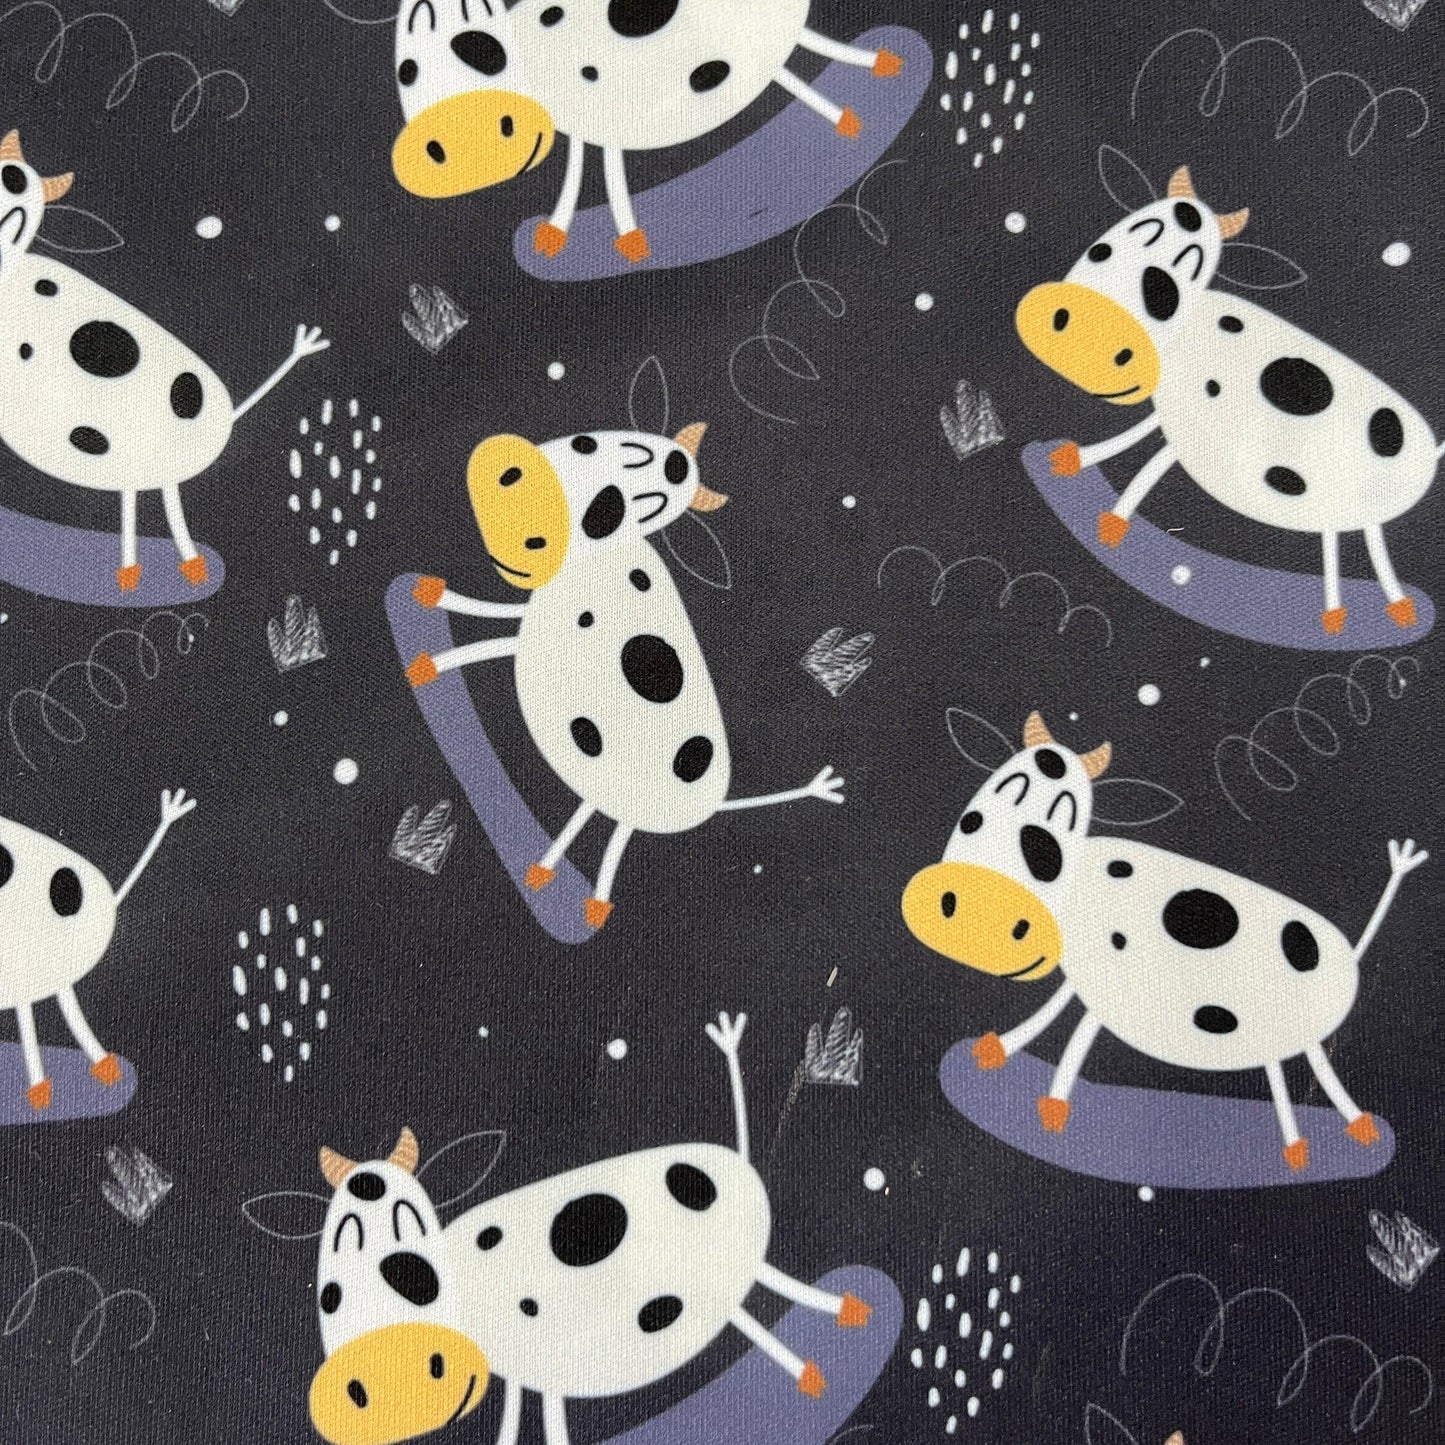 Floating Cows 1 mil PUL Fabric - Made in the USA - Nature's Fabrics